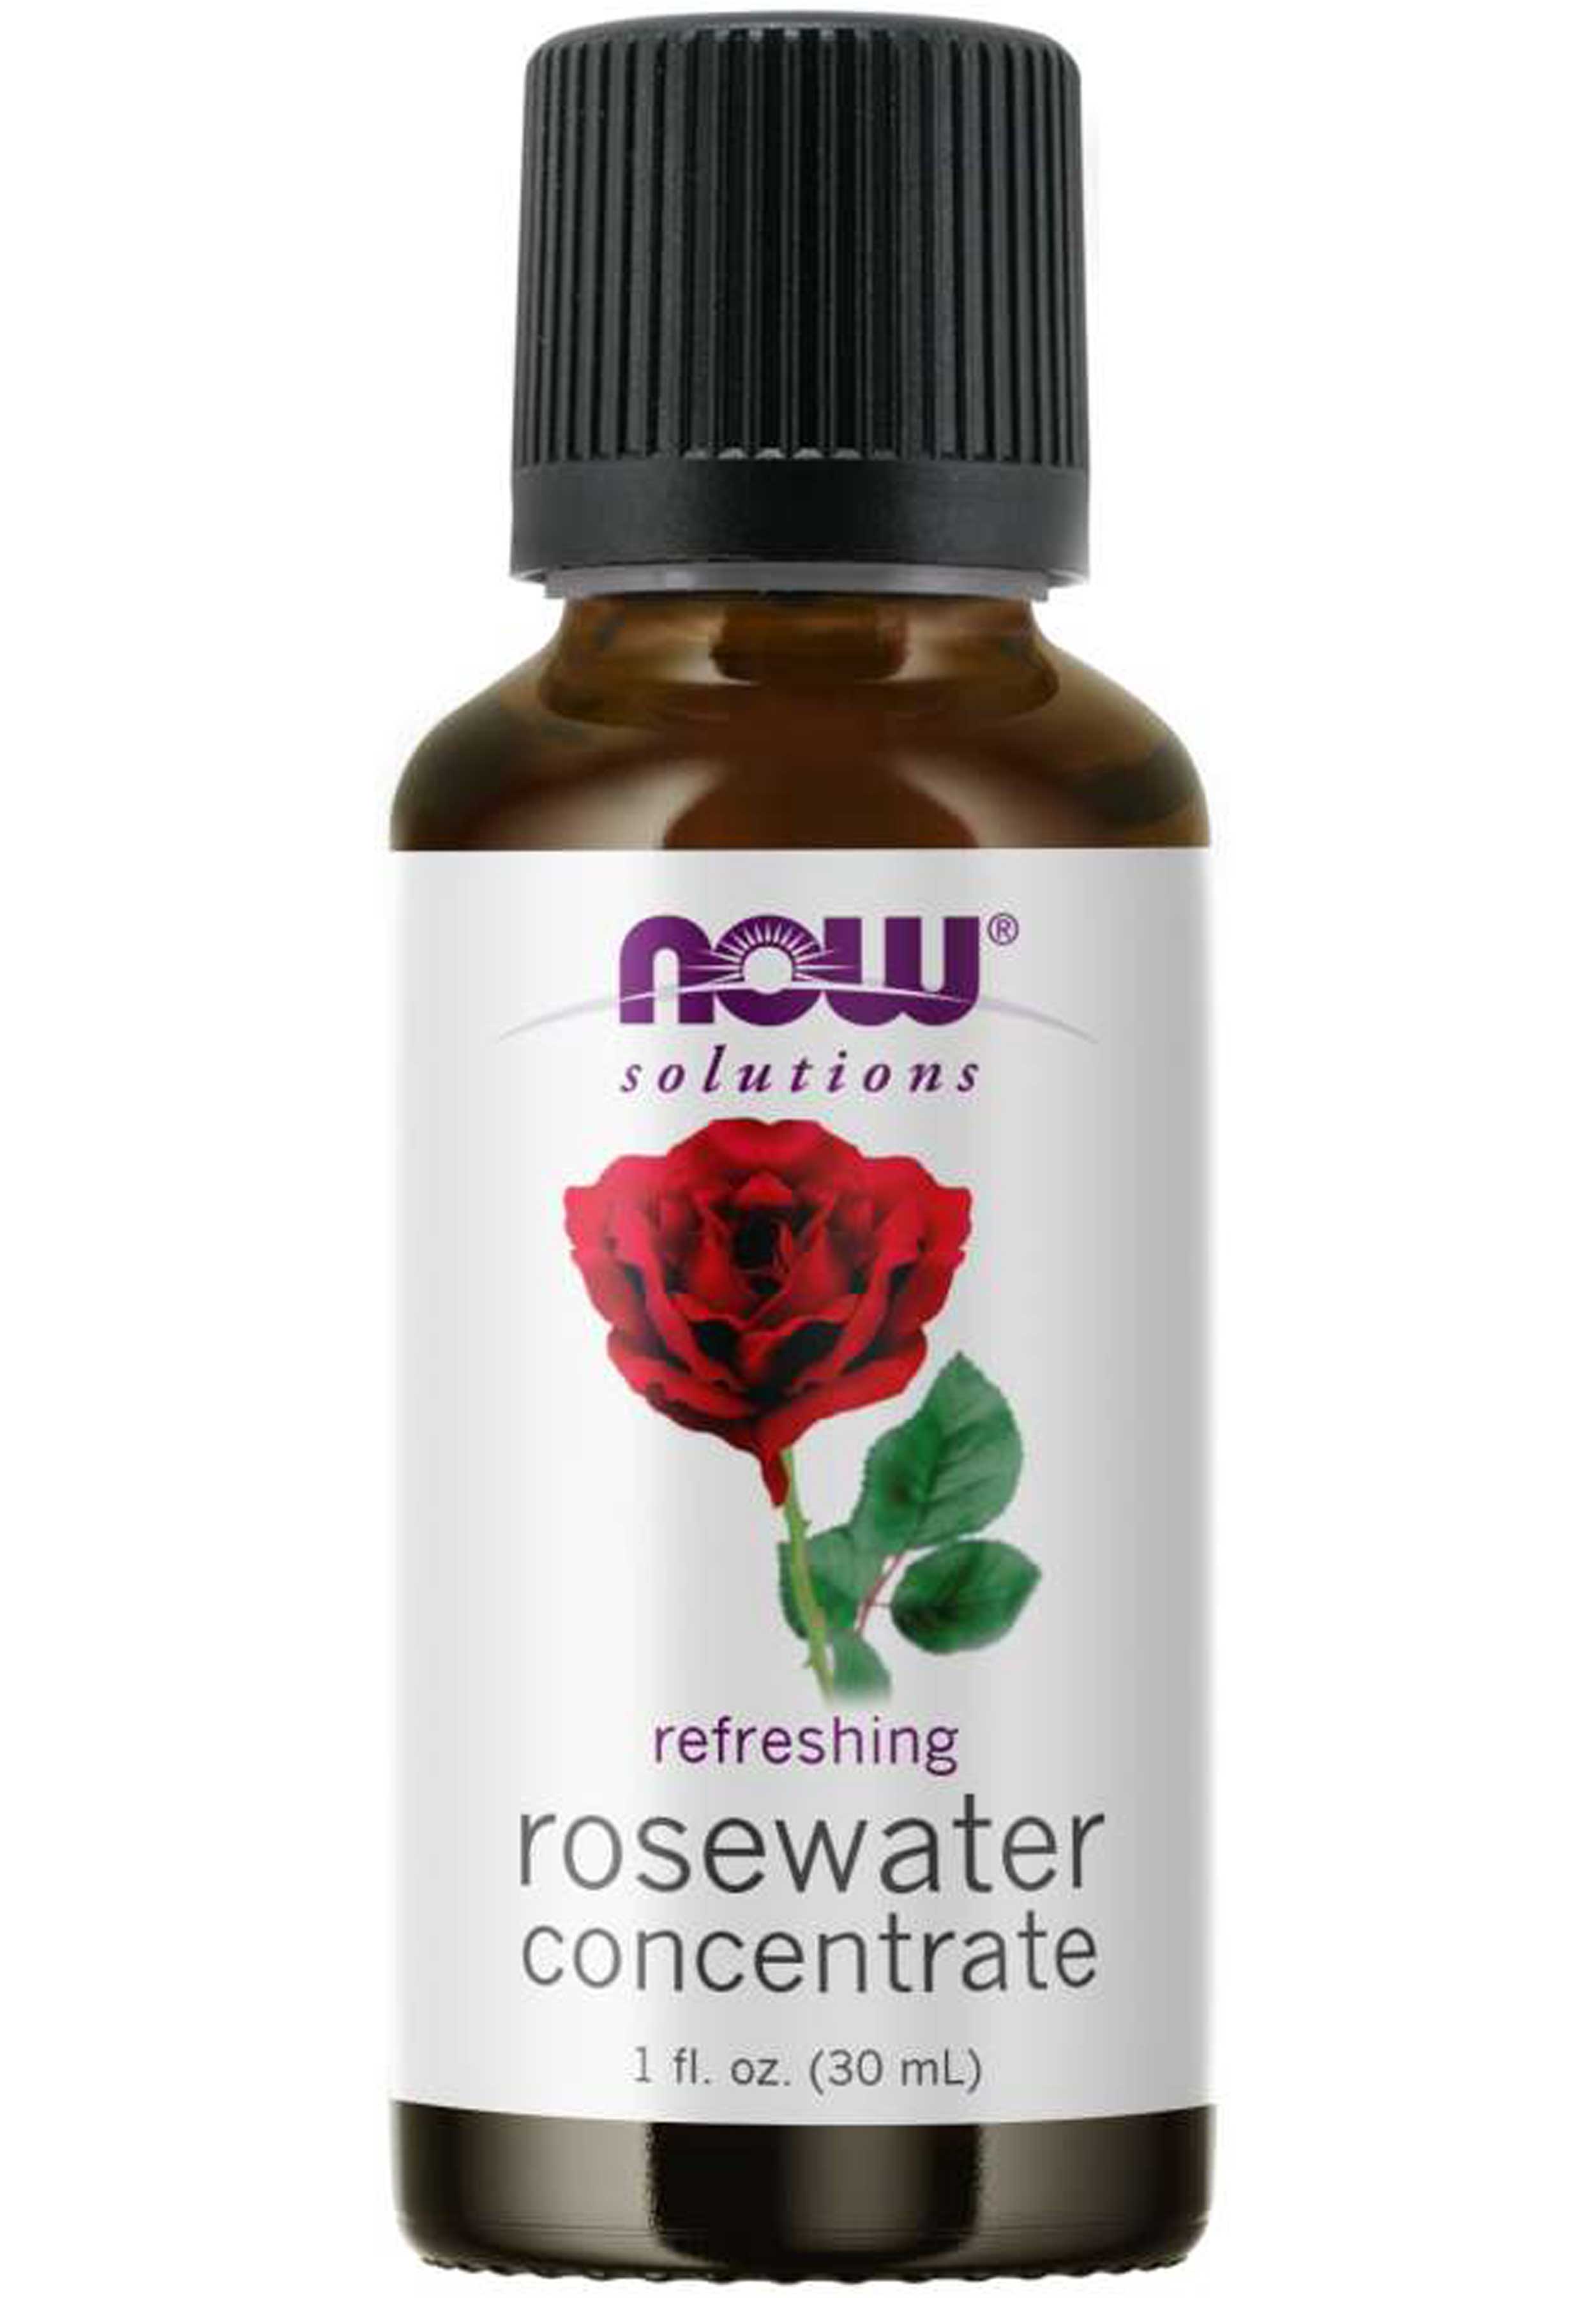 NOW Solutions Rosewater Concentrate